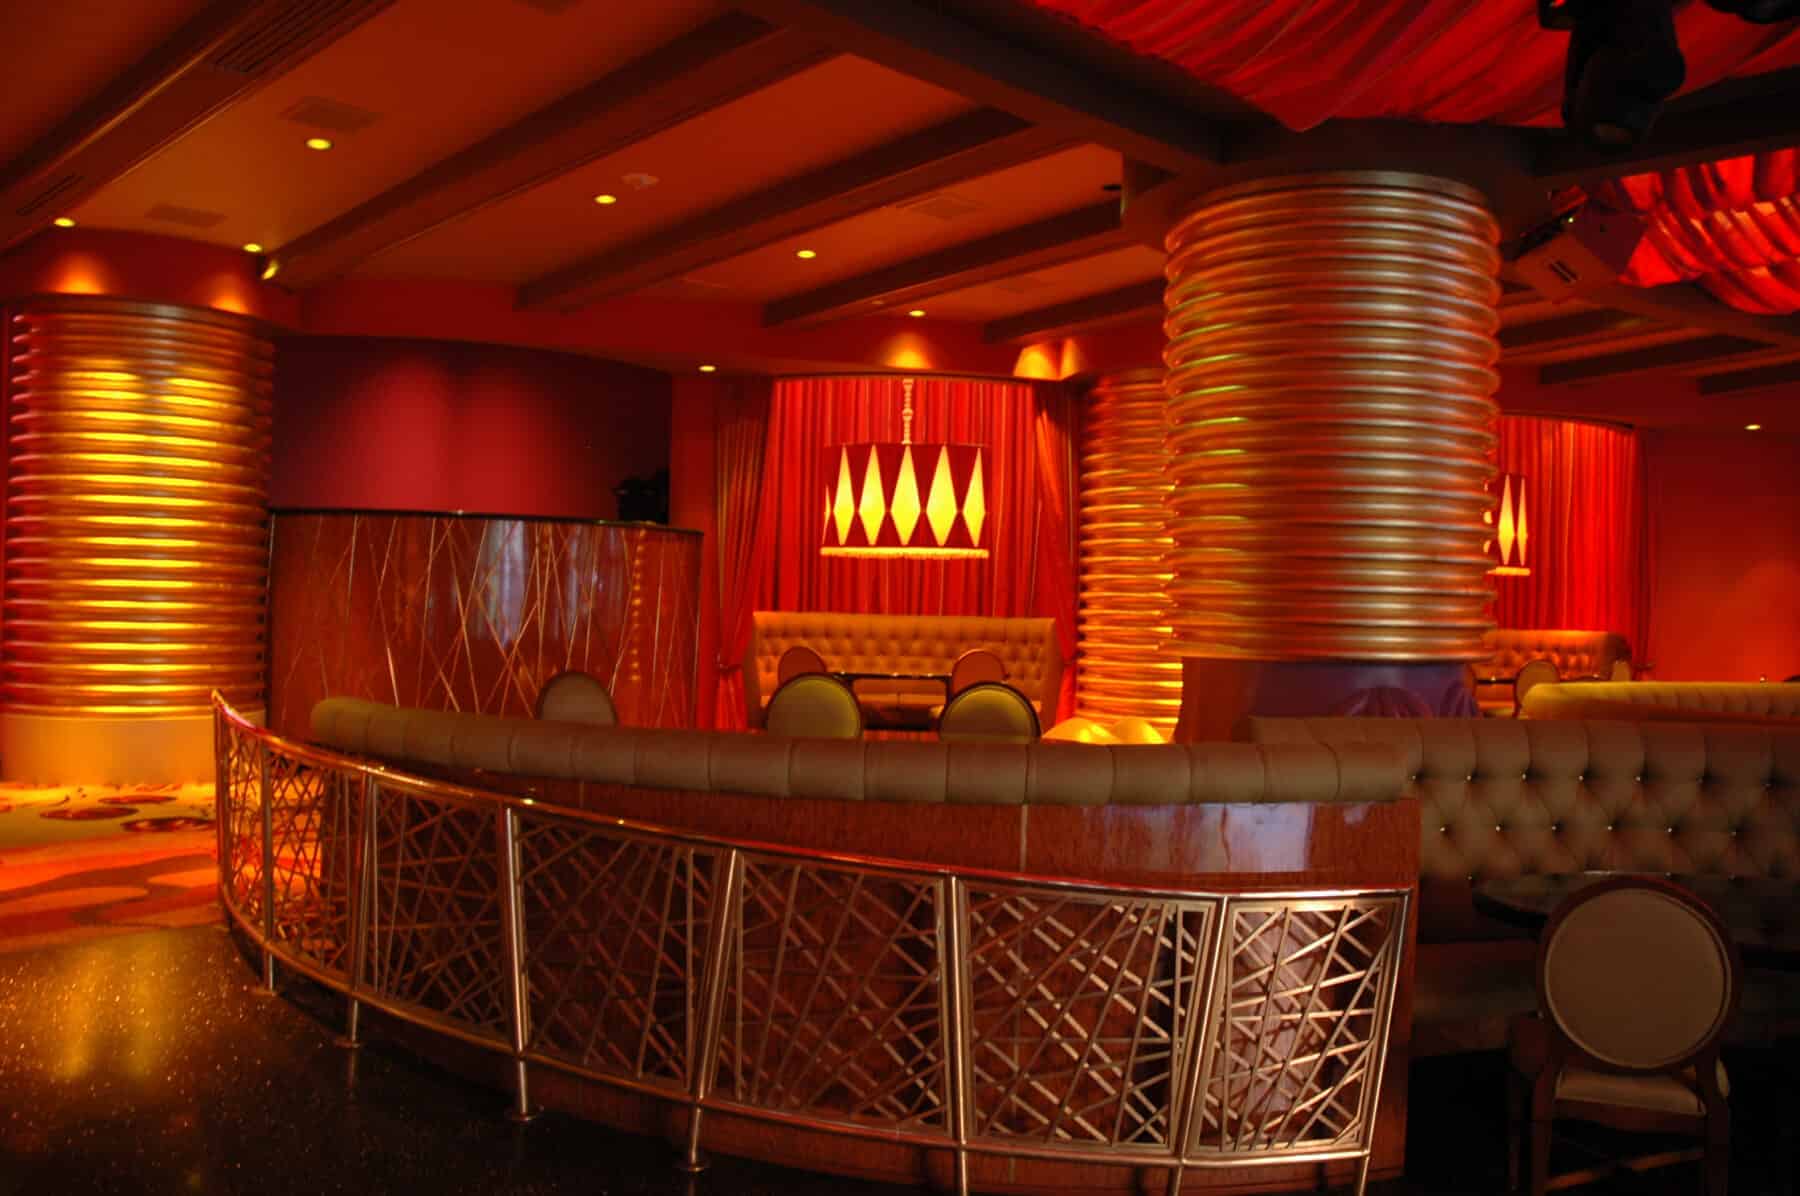 Custom Fabrication & Custom Woodworking. Specialty Contractors S&E Design Build Featured Project: Wynn Hotel